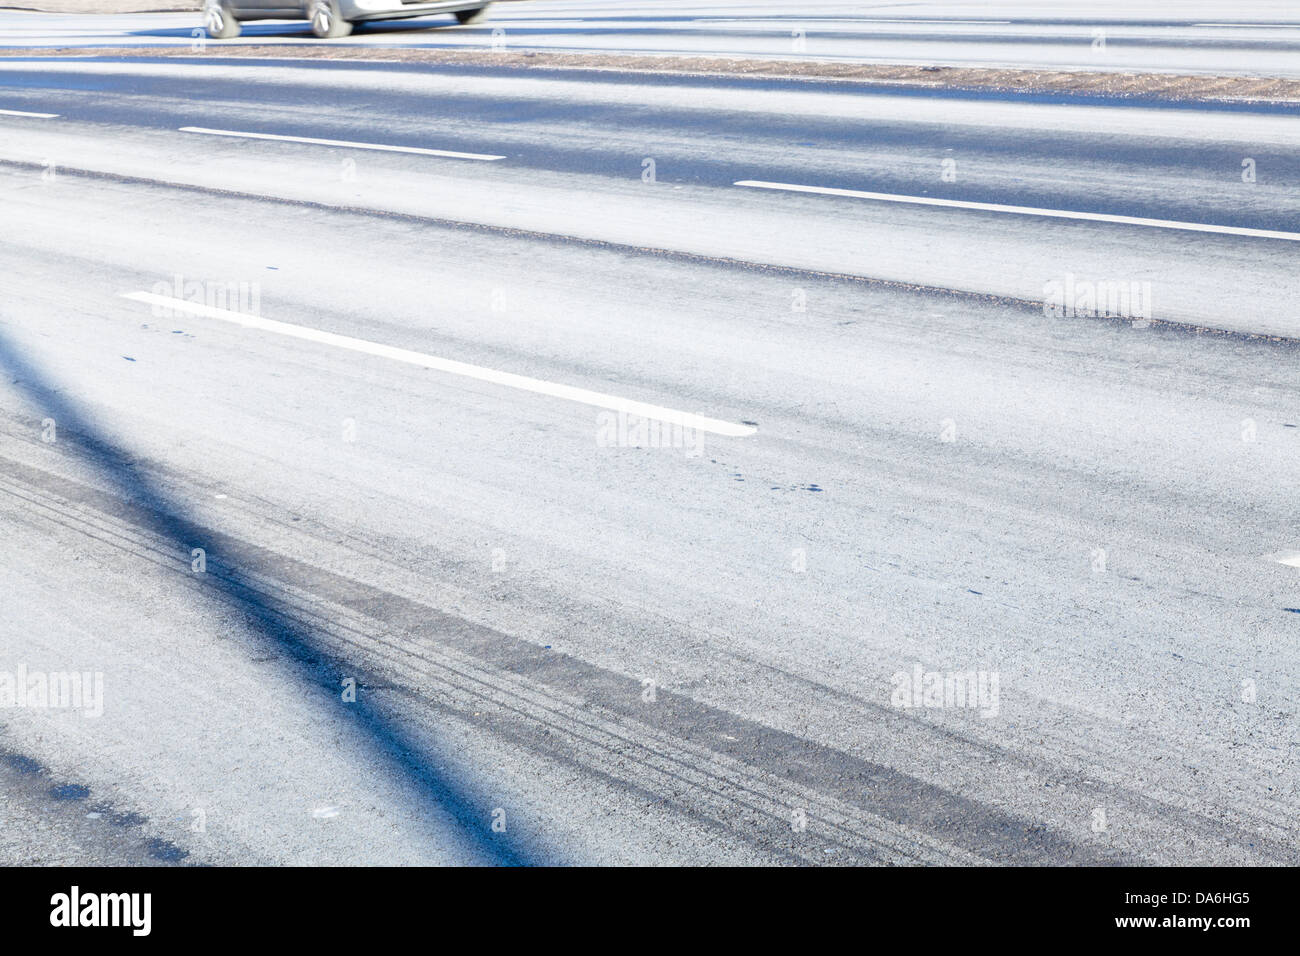 Abstract view of a road surface after winter salting showing shadows, markings and tyre marks Stock Photo